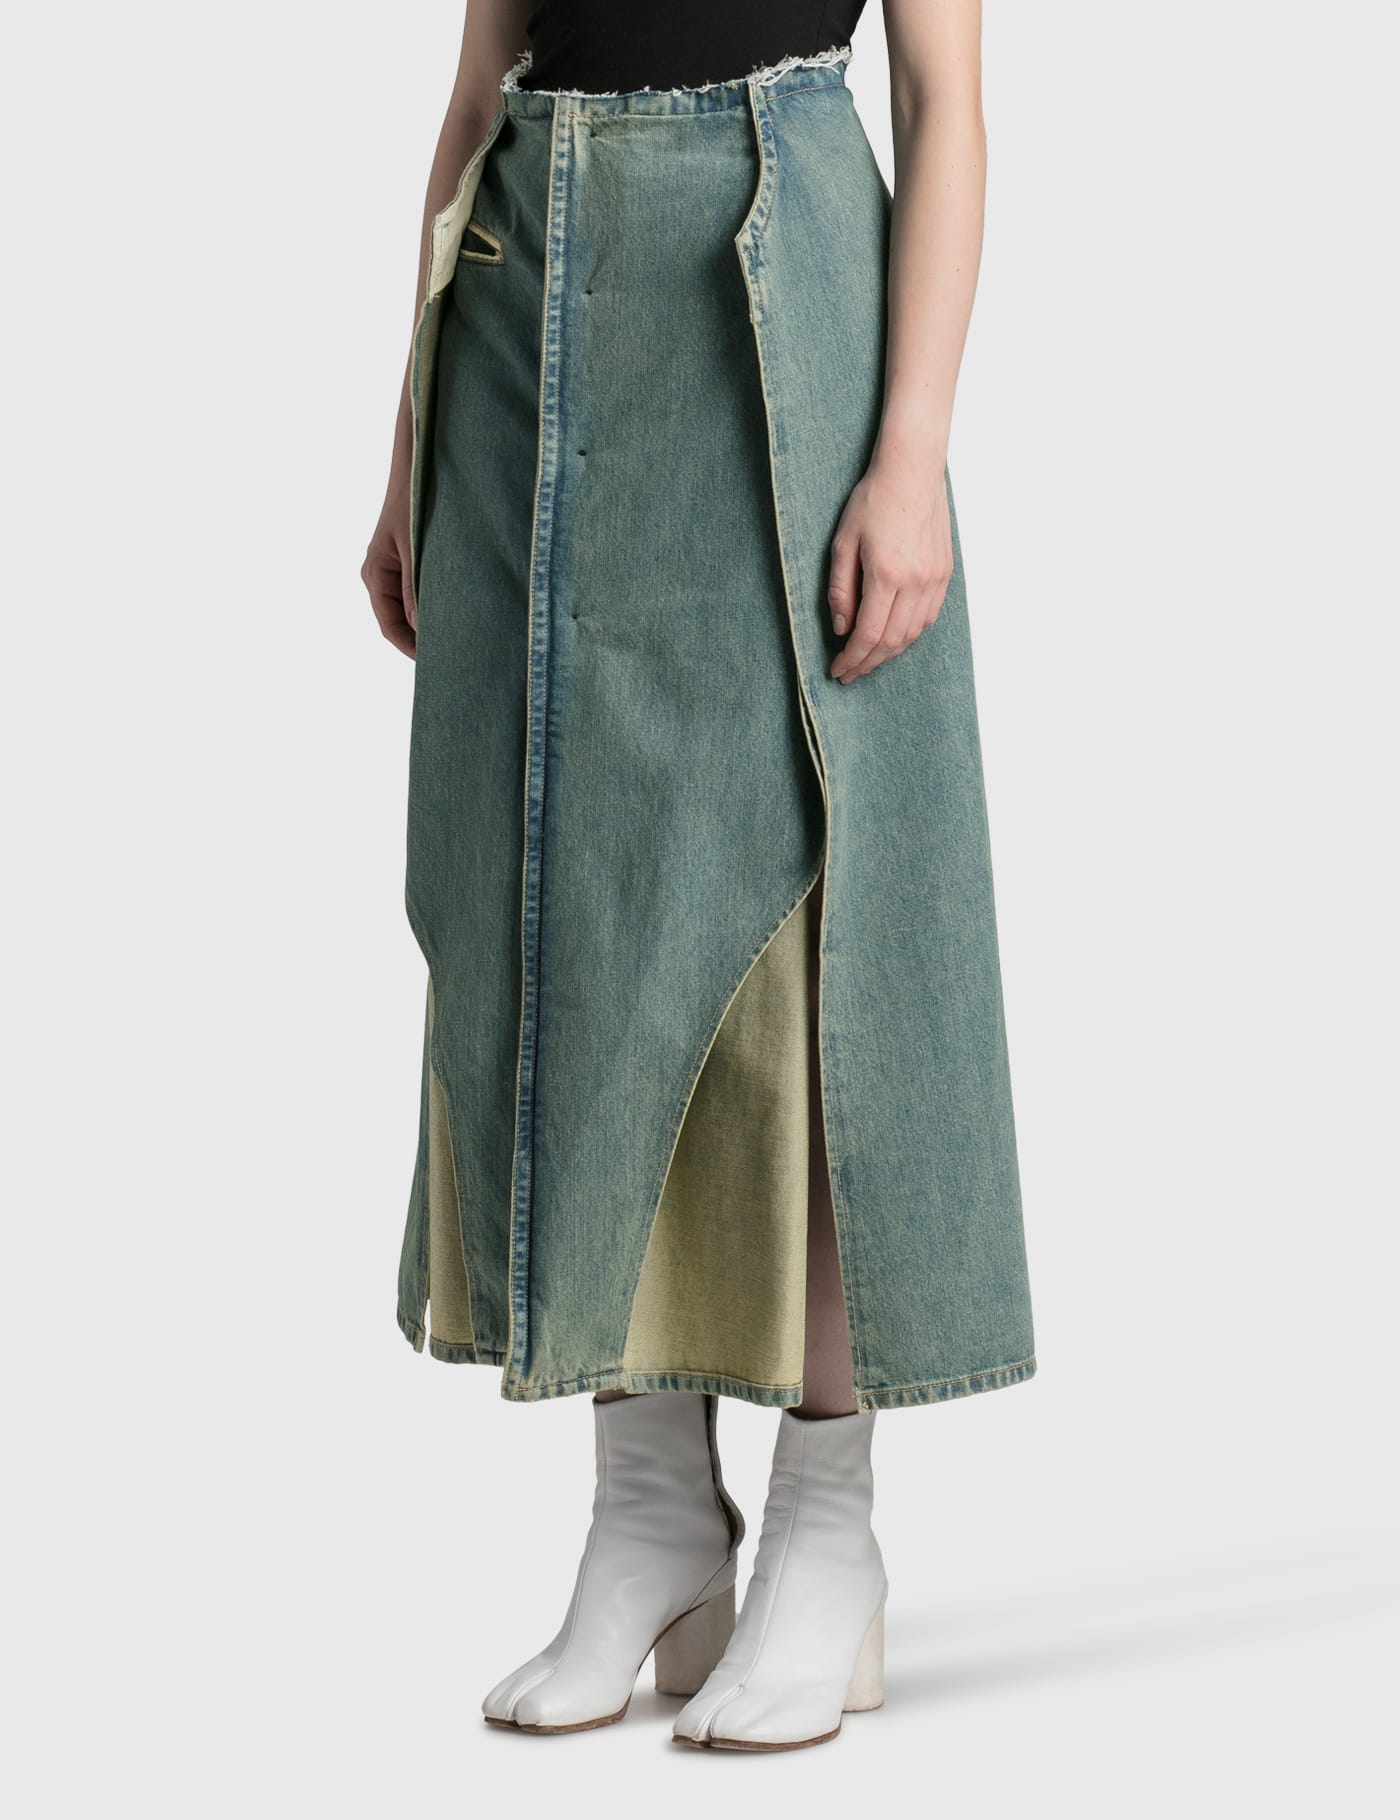 Maison Margiela - Reversed Button Denim Skirt | HBX - Globally Curated  Fashion and Lifestyle by Hypebeast